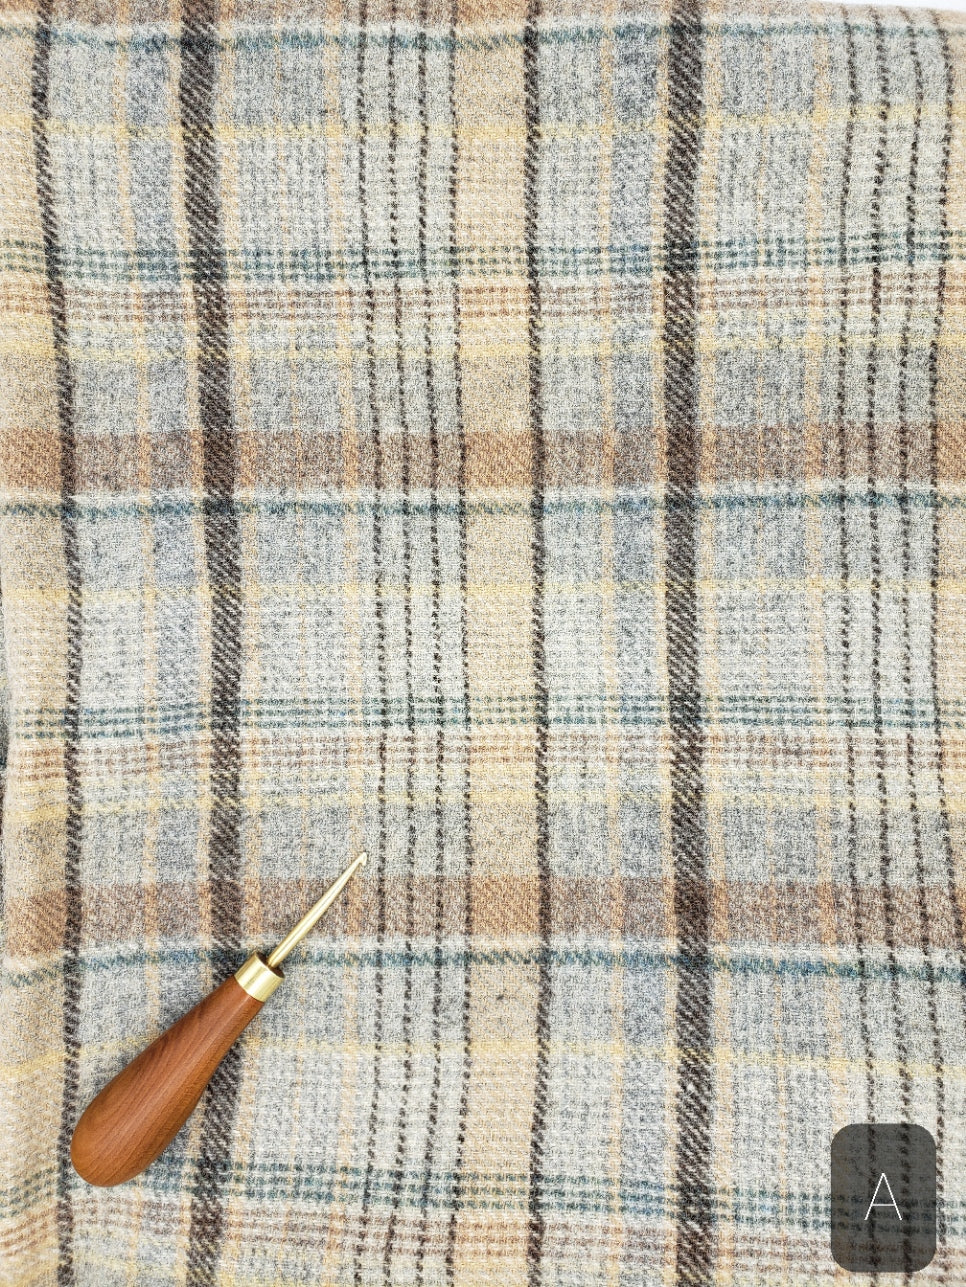 BLUE & BEIGE PLAID #274A - FAT QUARTER - Ready to use Wool Fabric for Rug Hooking or Wool Applique